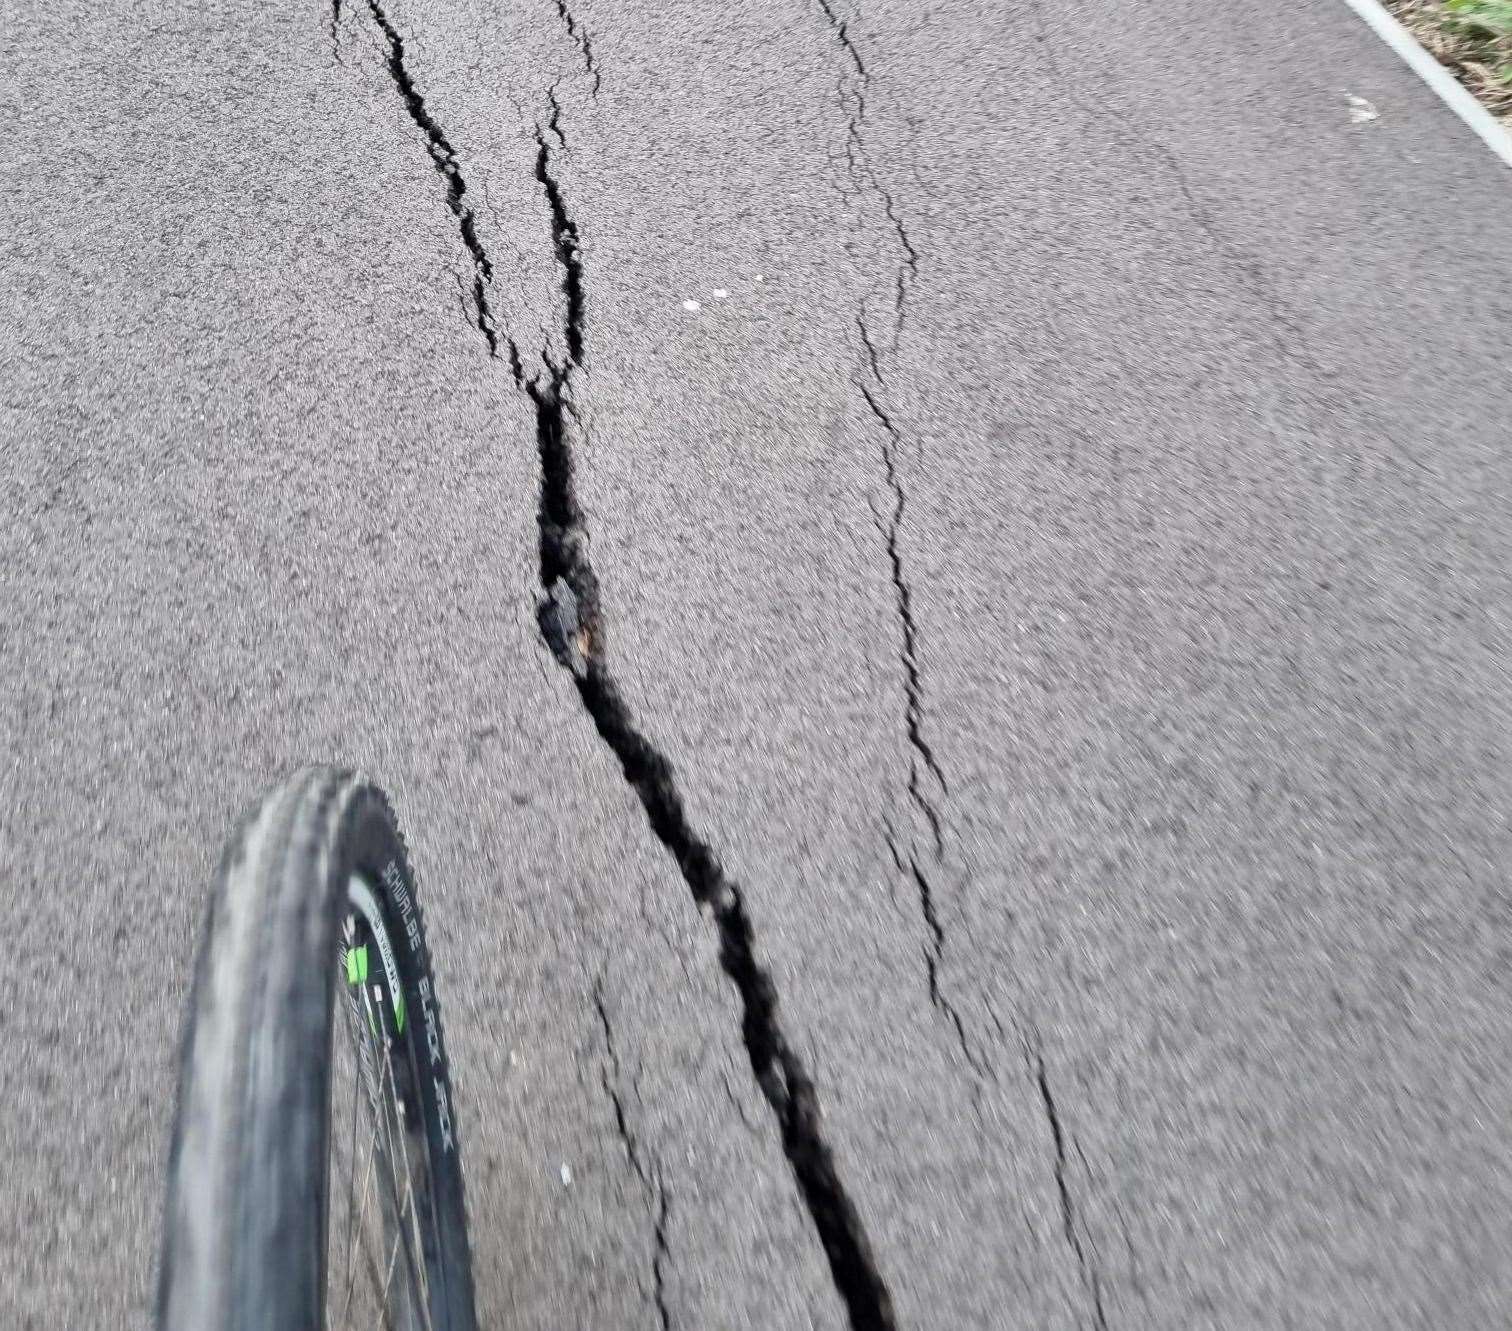 Mr Beaver counted the cracks during a bicycle trip this week. Picture: Sean Beaver